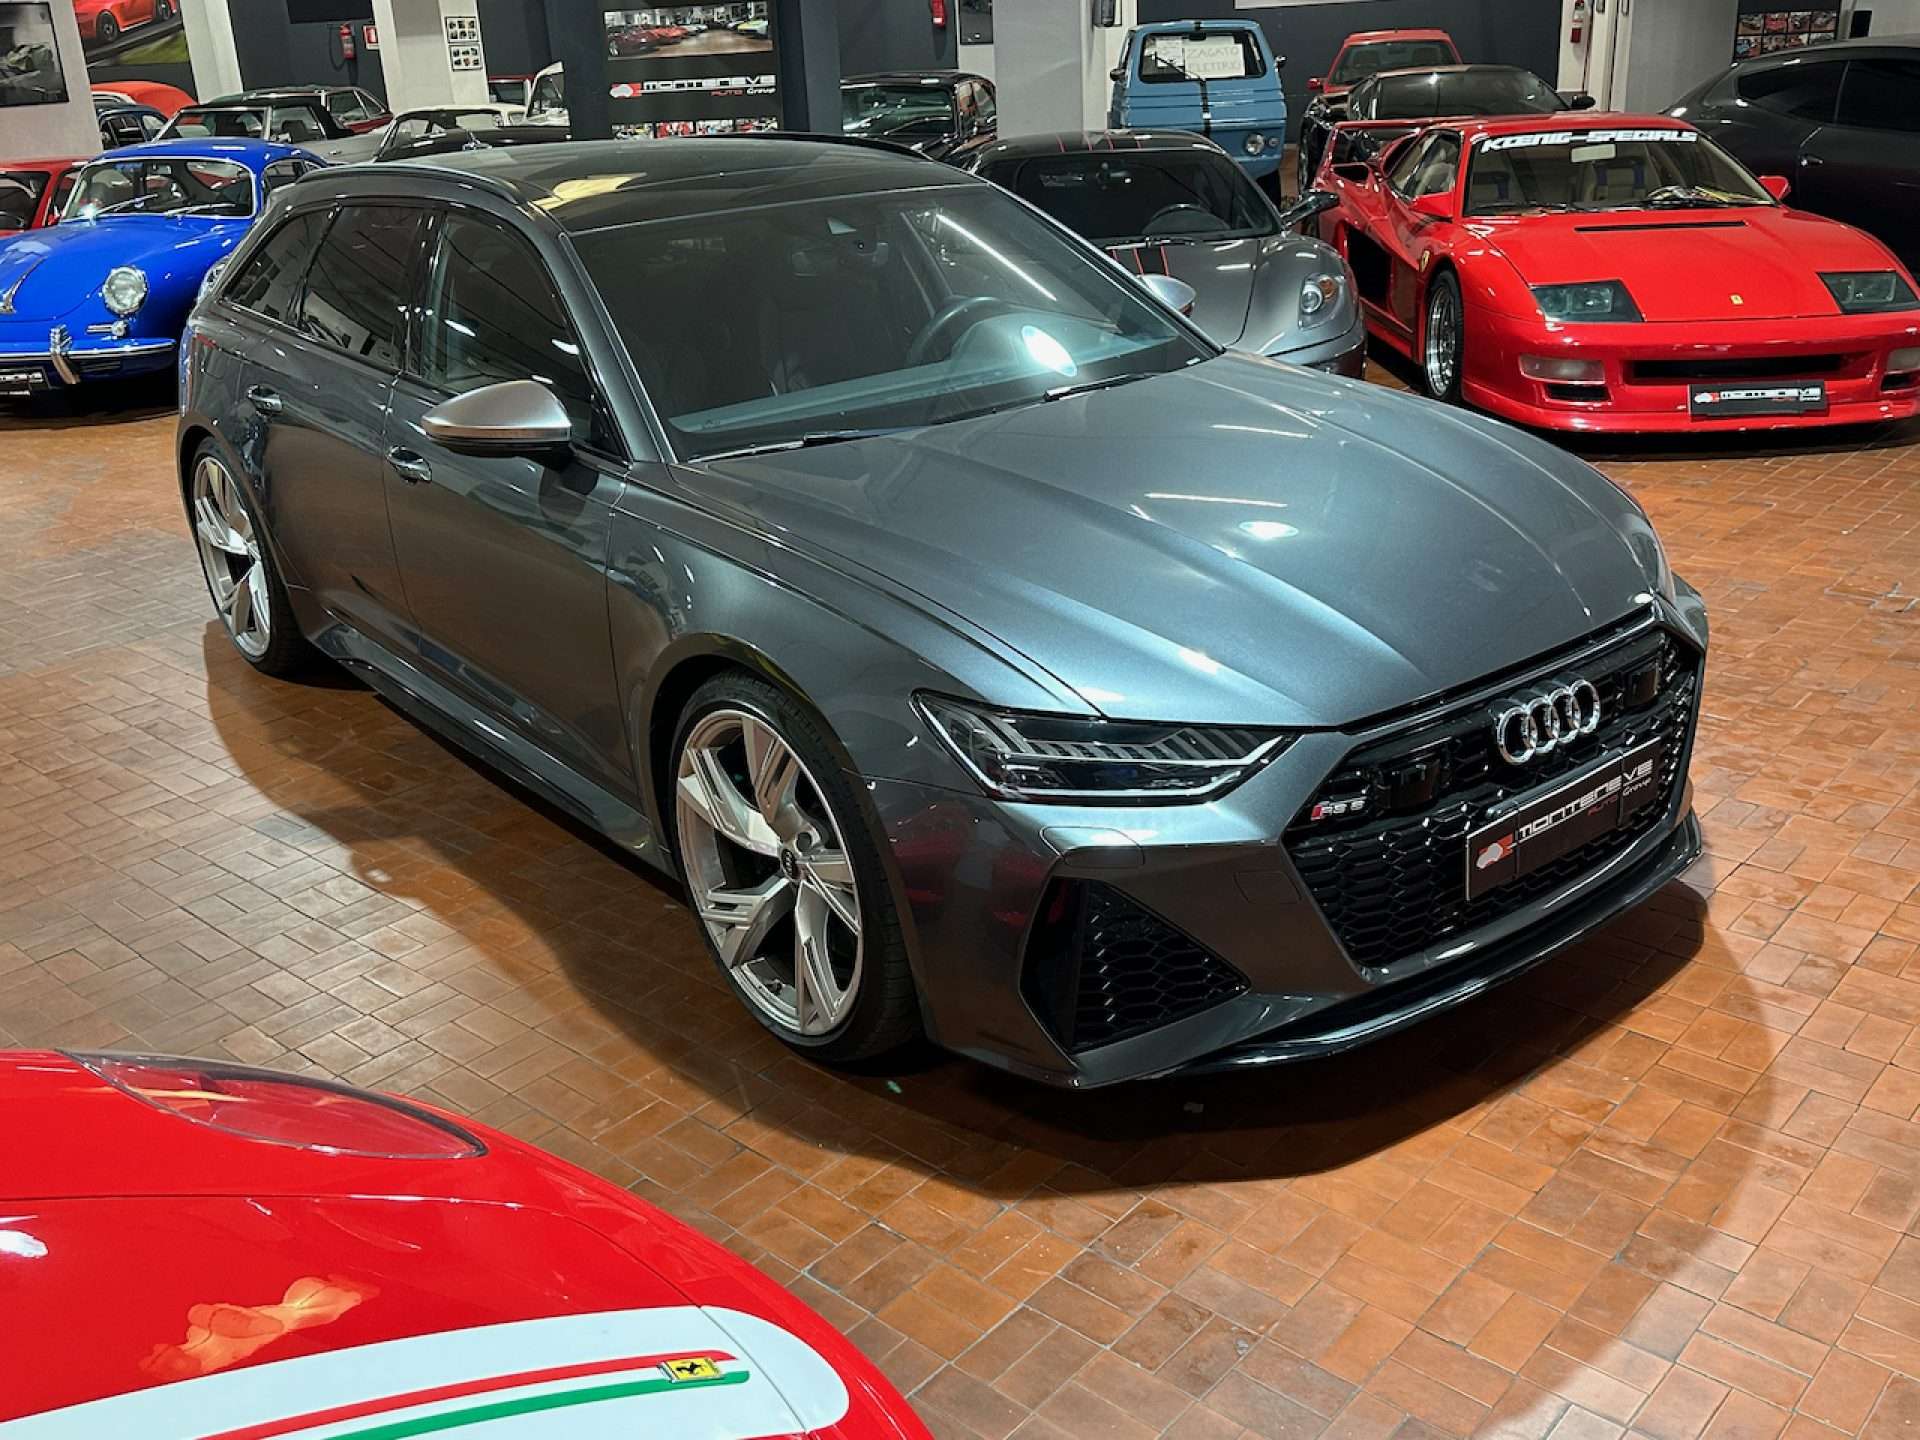 Audi RS6 Station wagon in Grey used in Roma - Rm for € 97,000.-